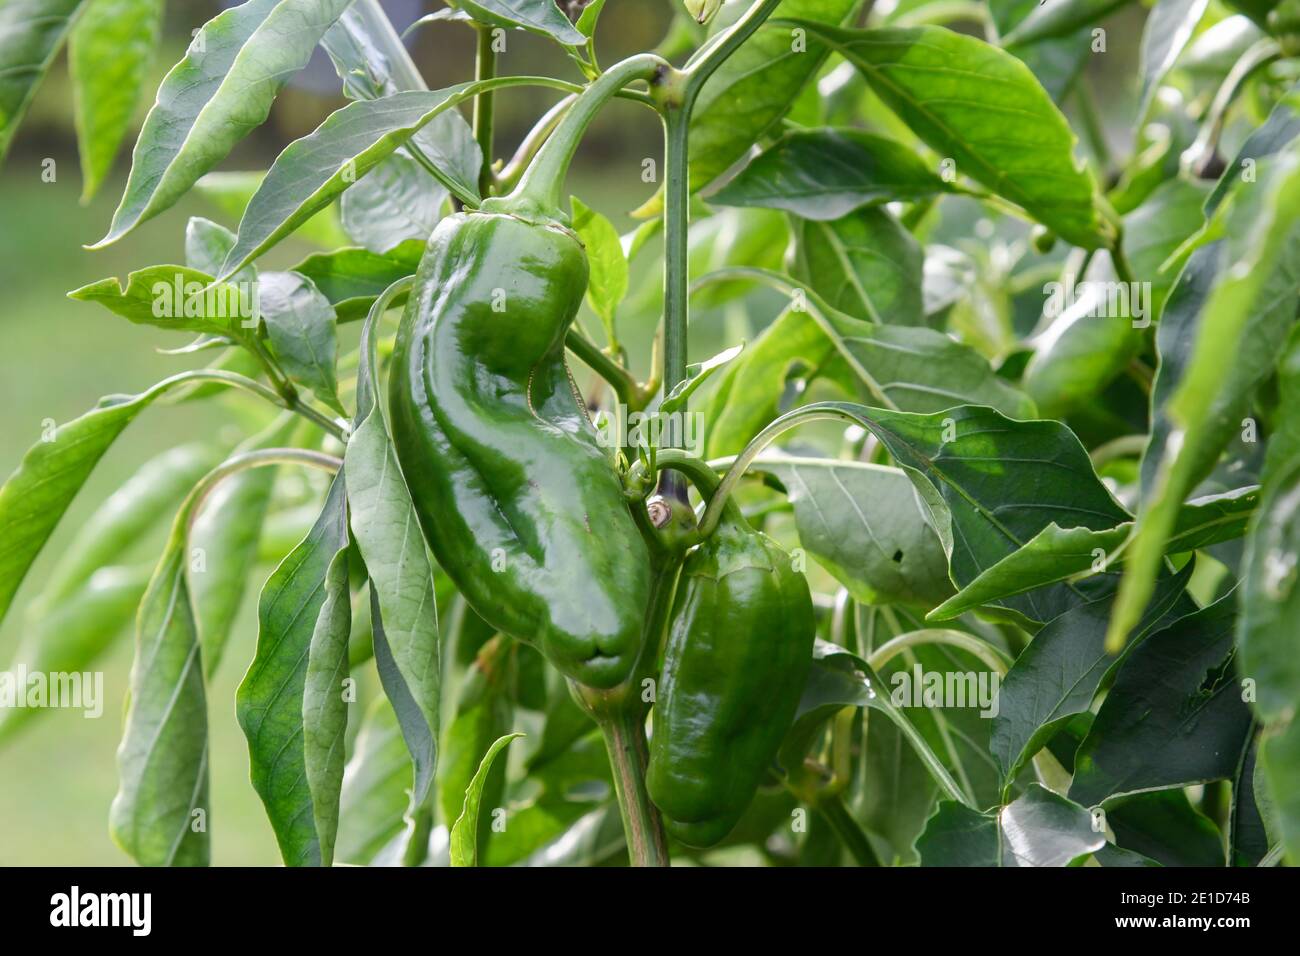 Closeup of a pepper plant with its fruits Stock Photo